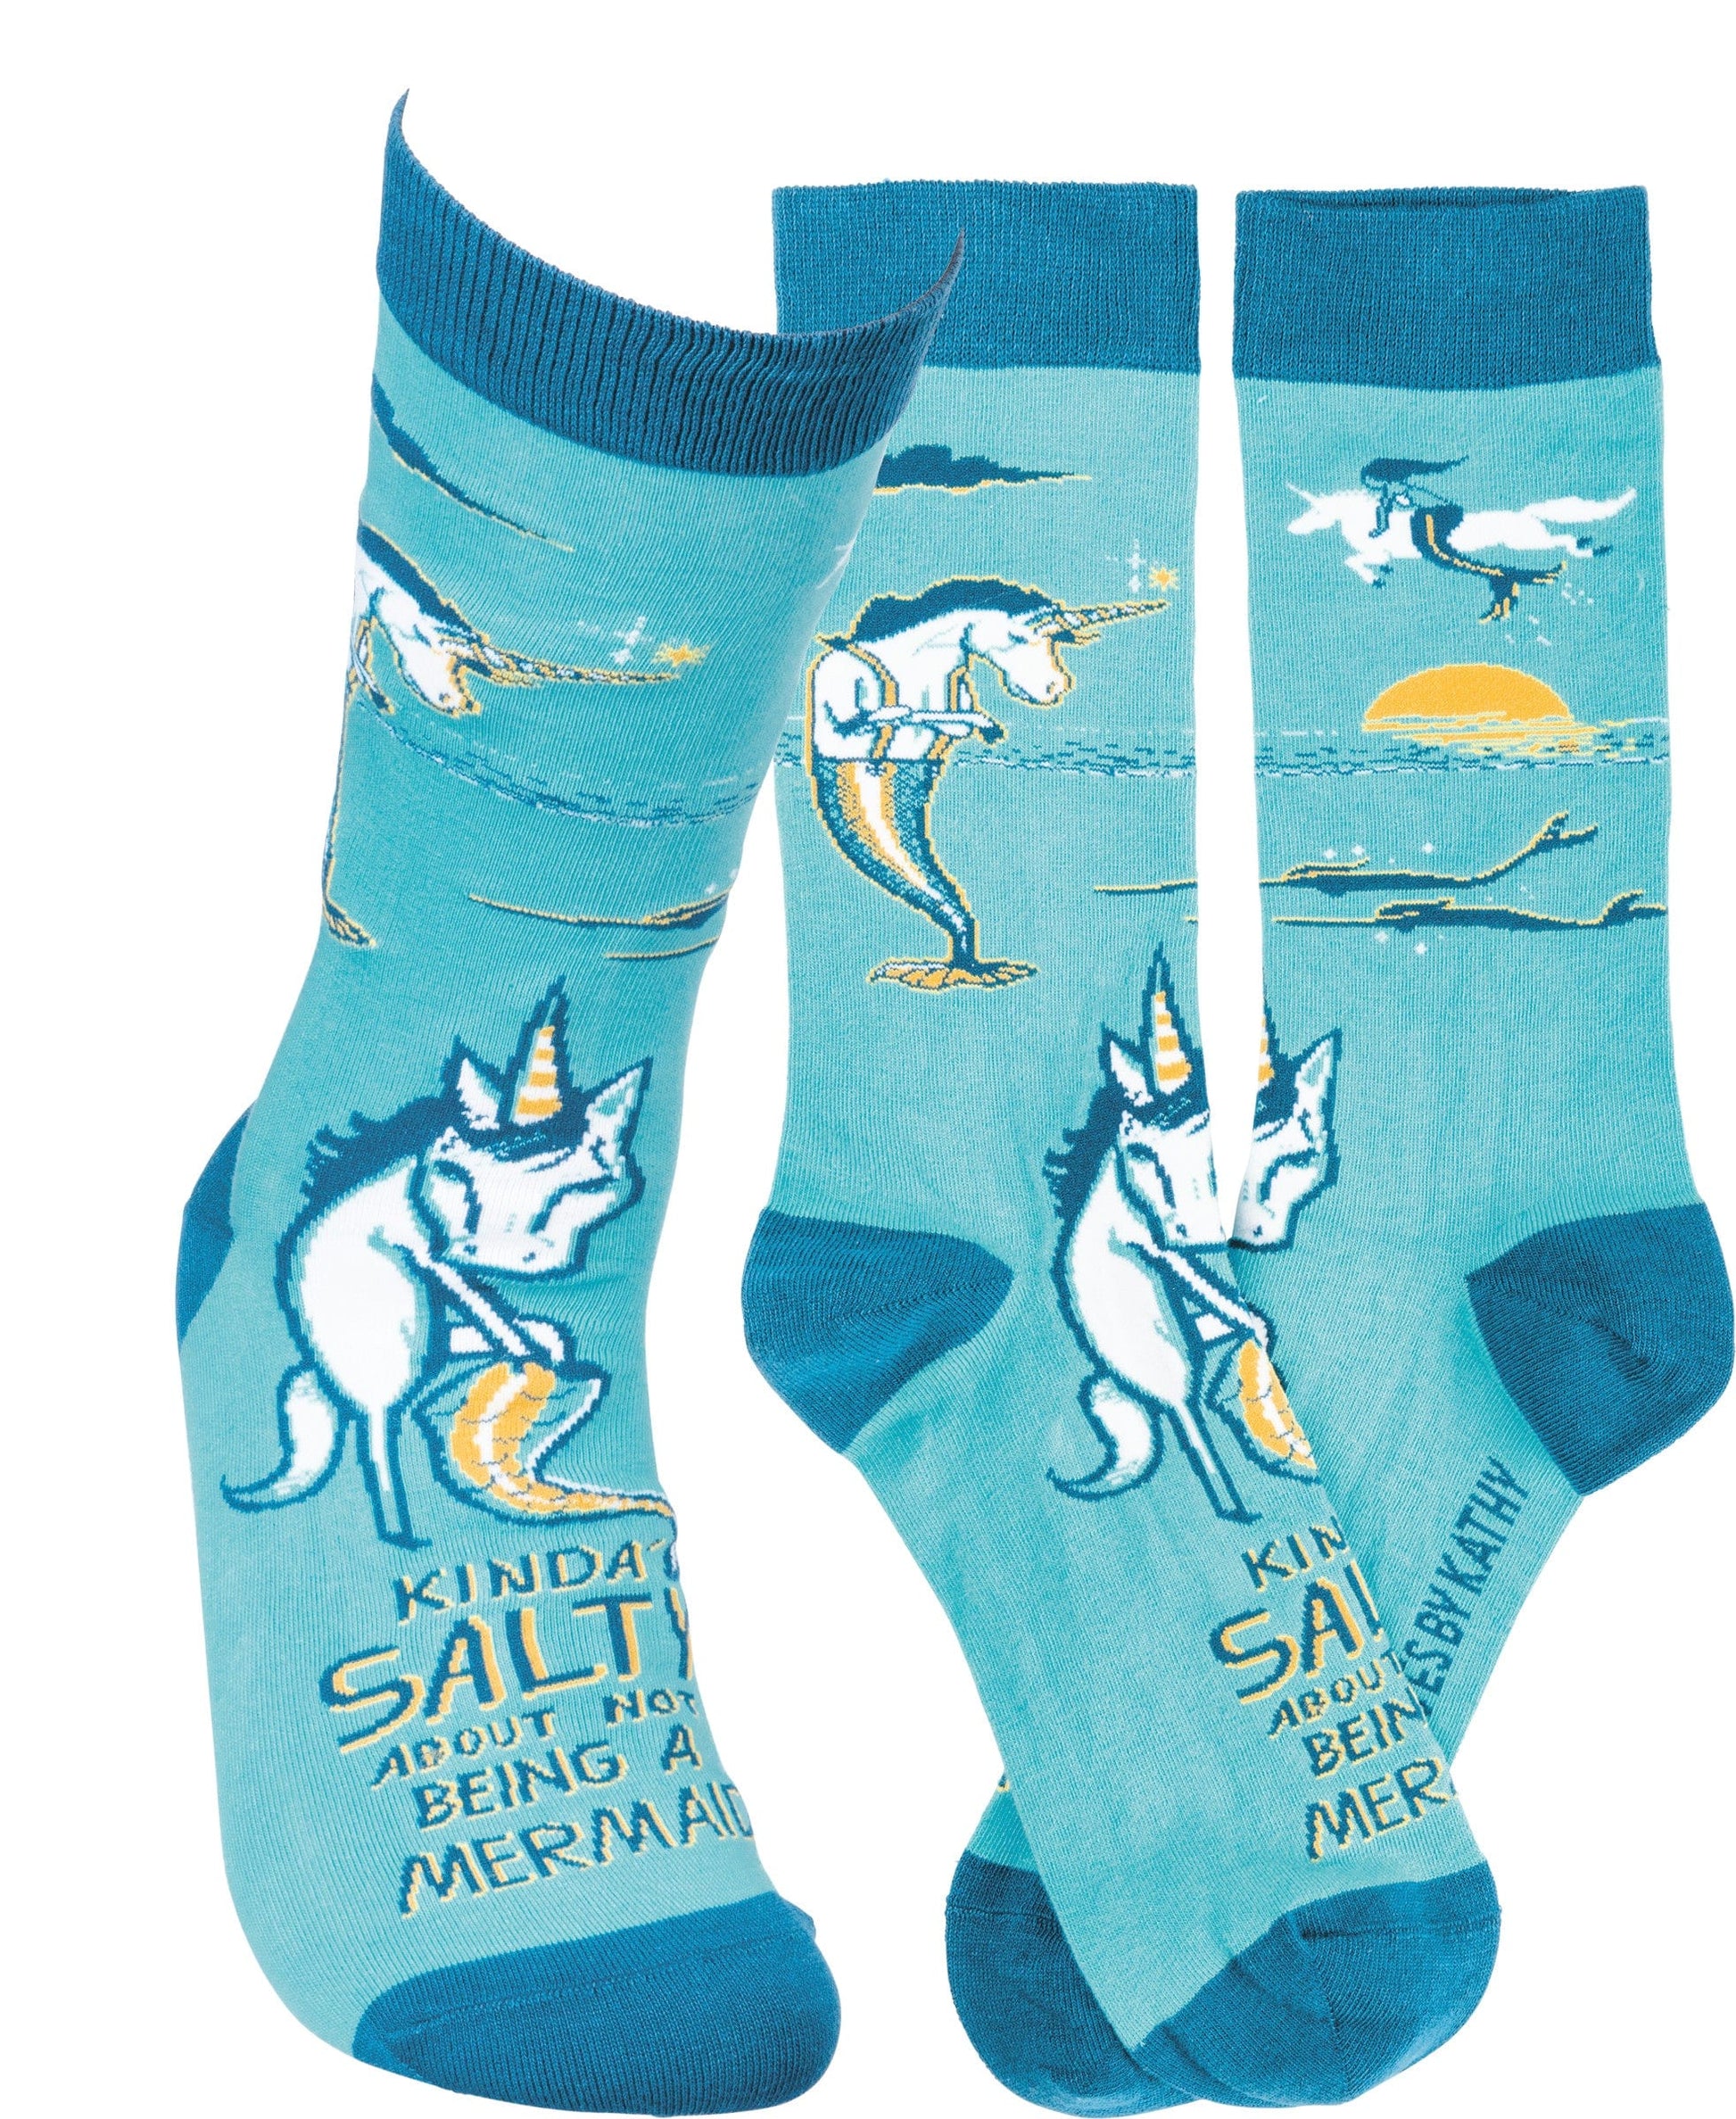 Socks One Size Fits Most Socks - Kinda' Salty About Not Being A Mermaid PBK-102775